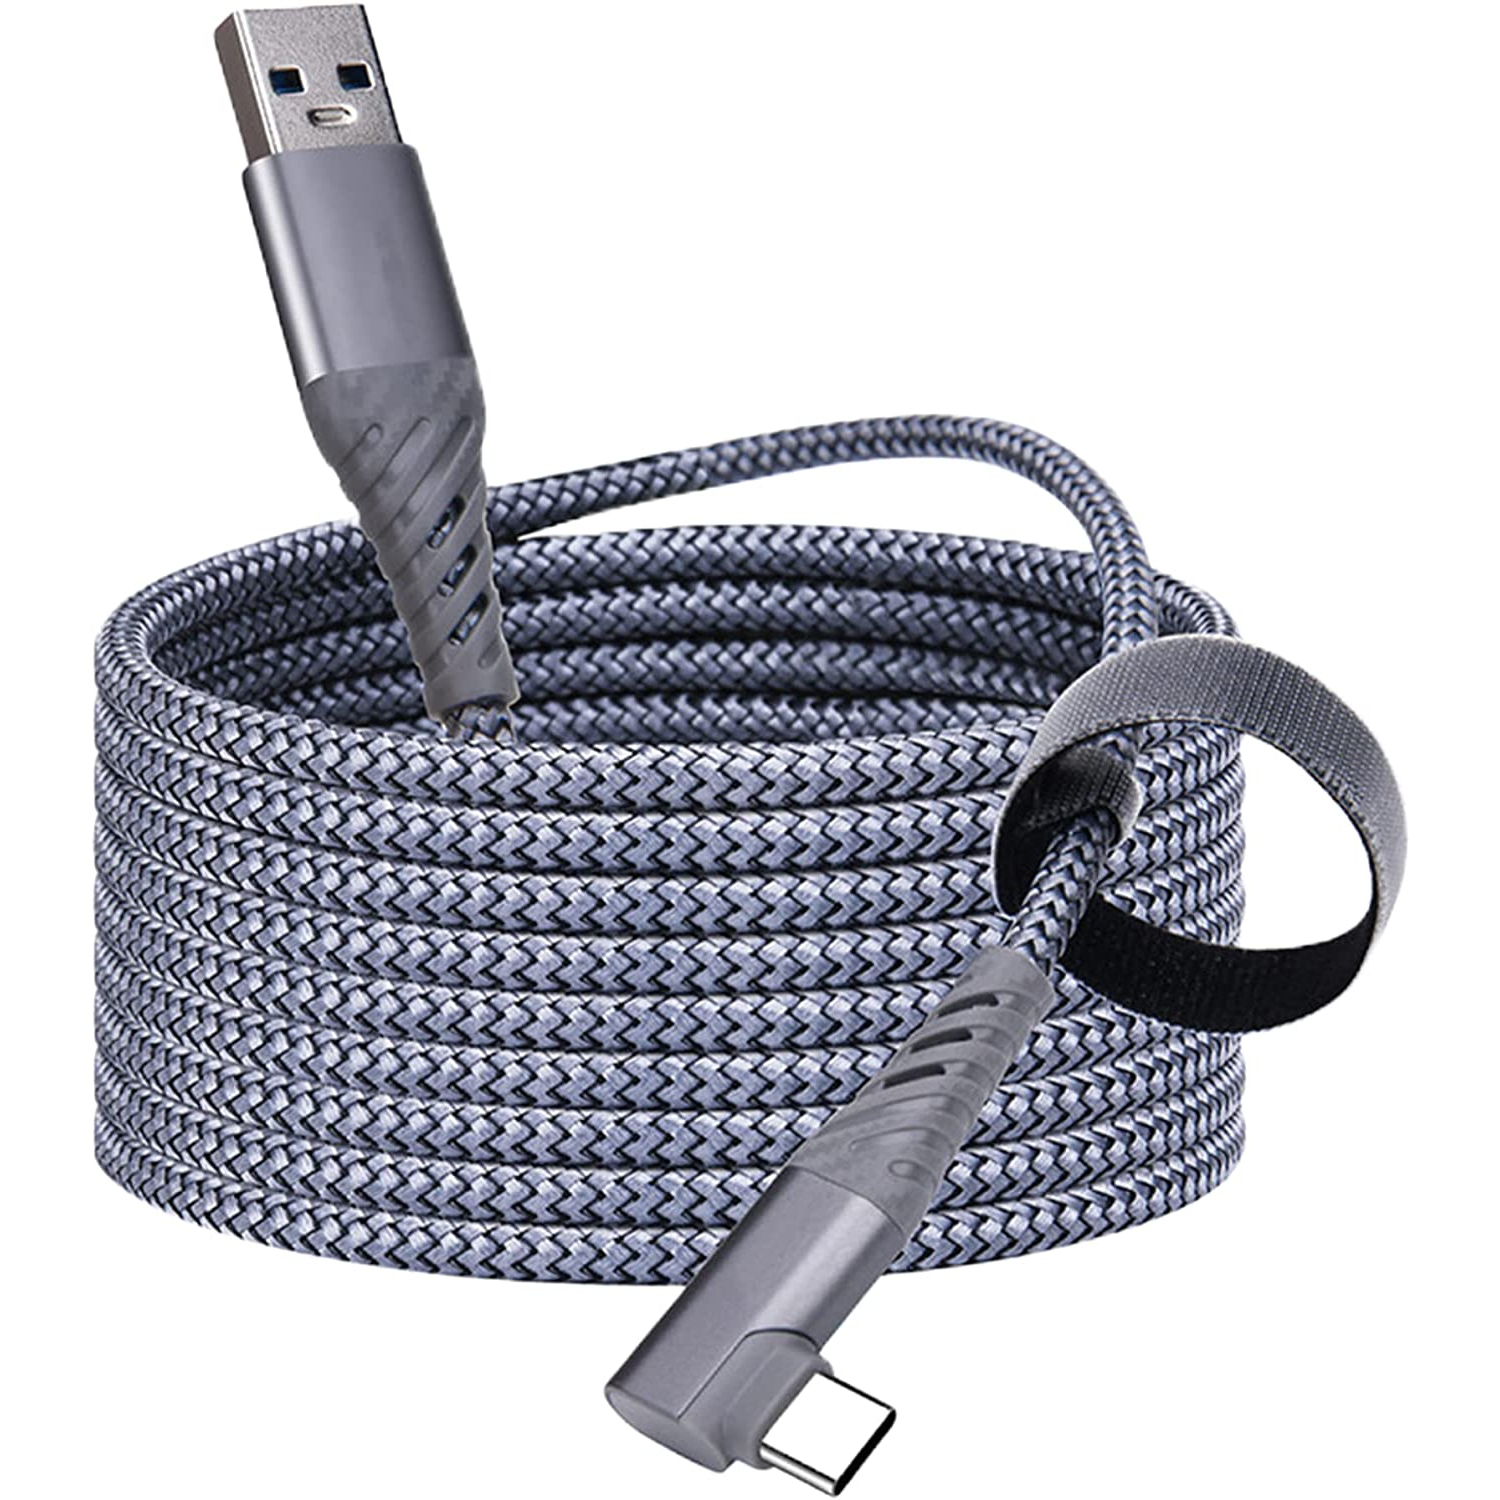 The Bigly Brothers 10ft(3m) USB C Cable, USB A to USB C 90 Degree Braided Fast Charging Cable, USB to USB C 5Gbps Data Transfer for Oculus Quest 2/1/Phone/PC/Laptop/Tablet/Headset